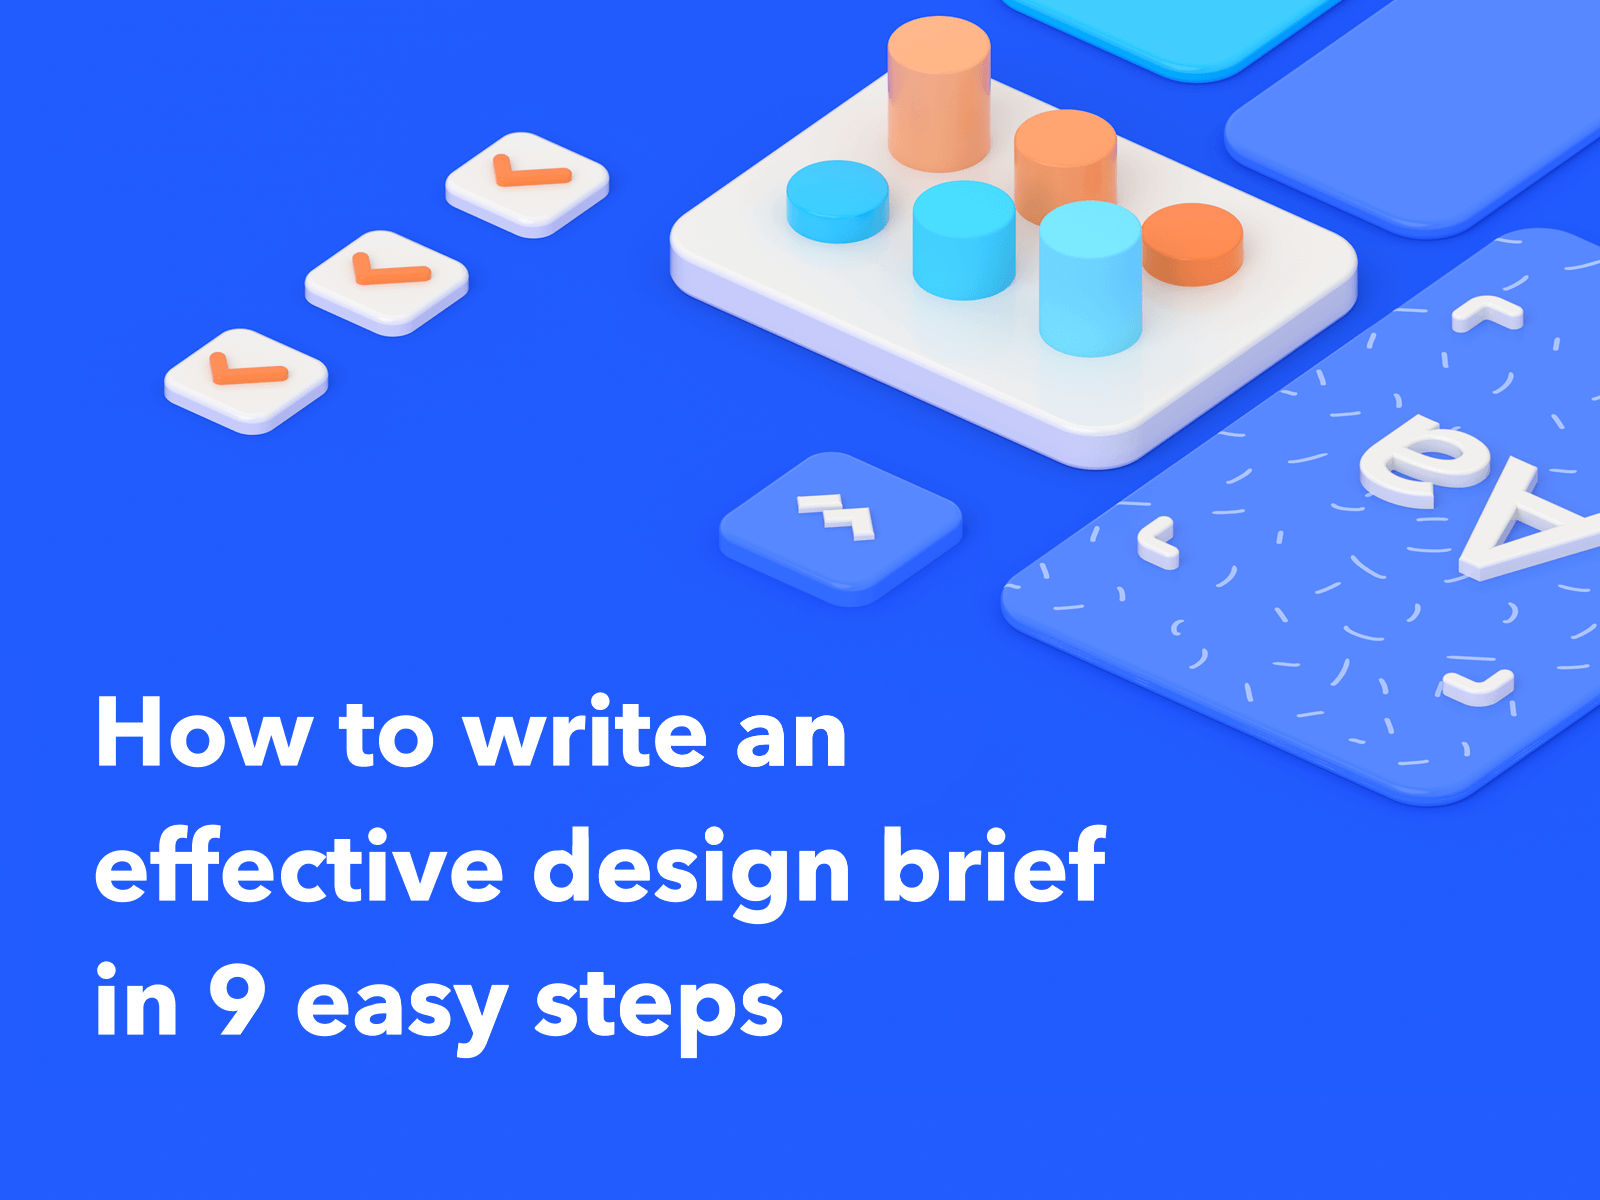 How to write an effective design brief in 9 easy steps article by Victor  Vorontsov for Maze on Dribbble